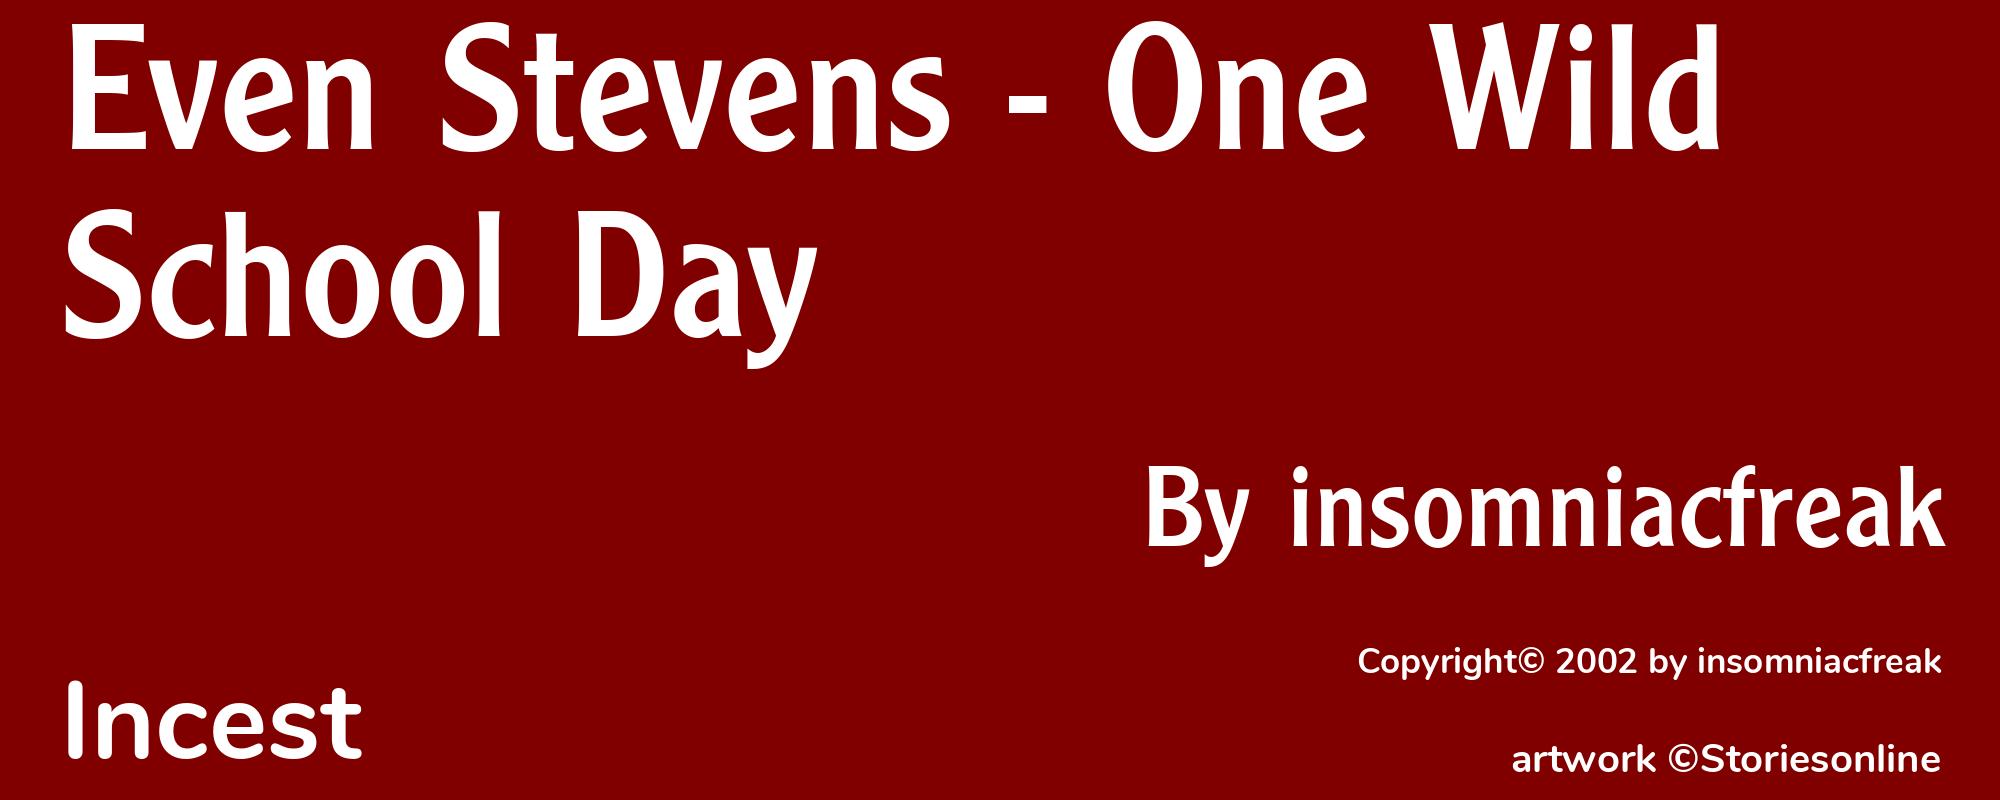 Even Stevens - One Wild School Day - Cover